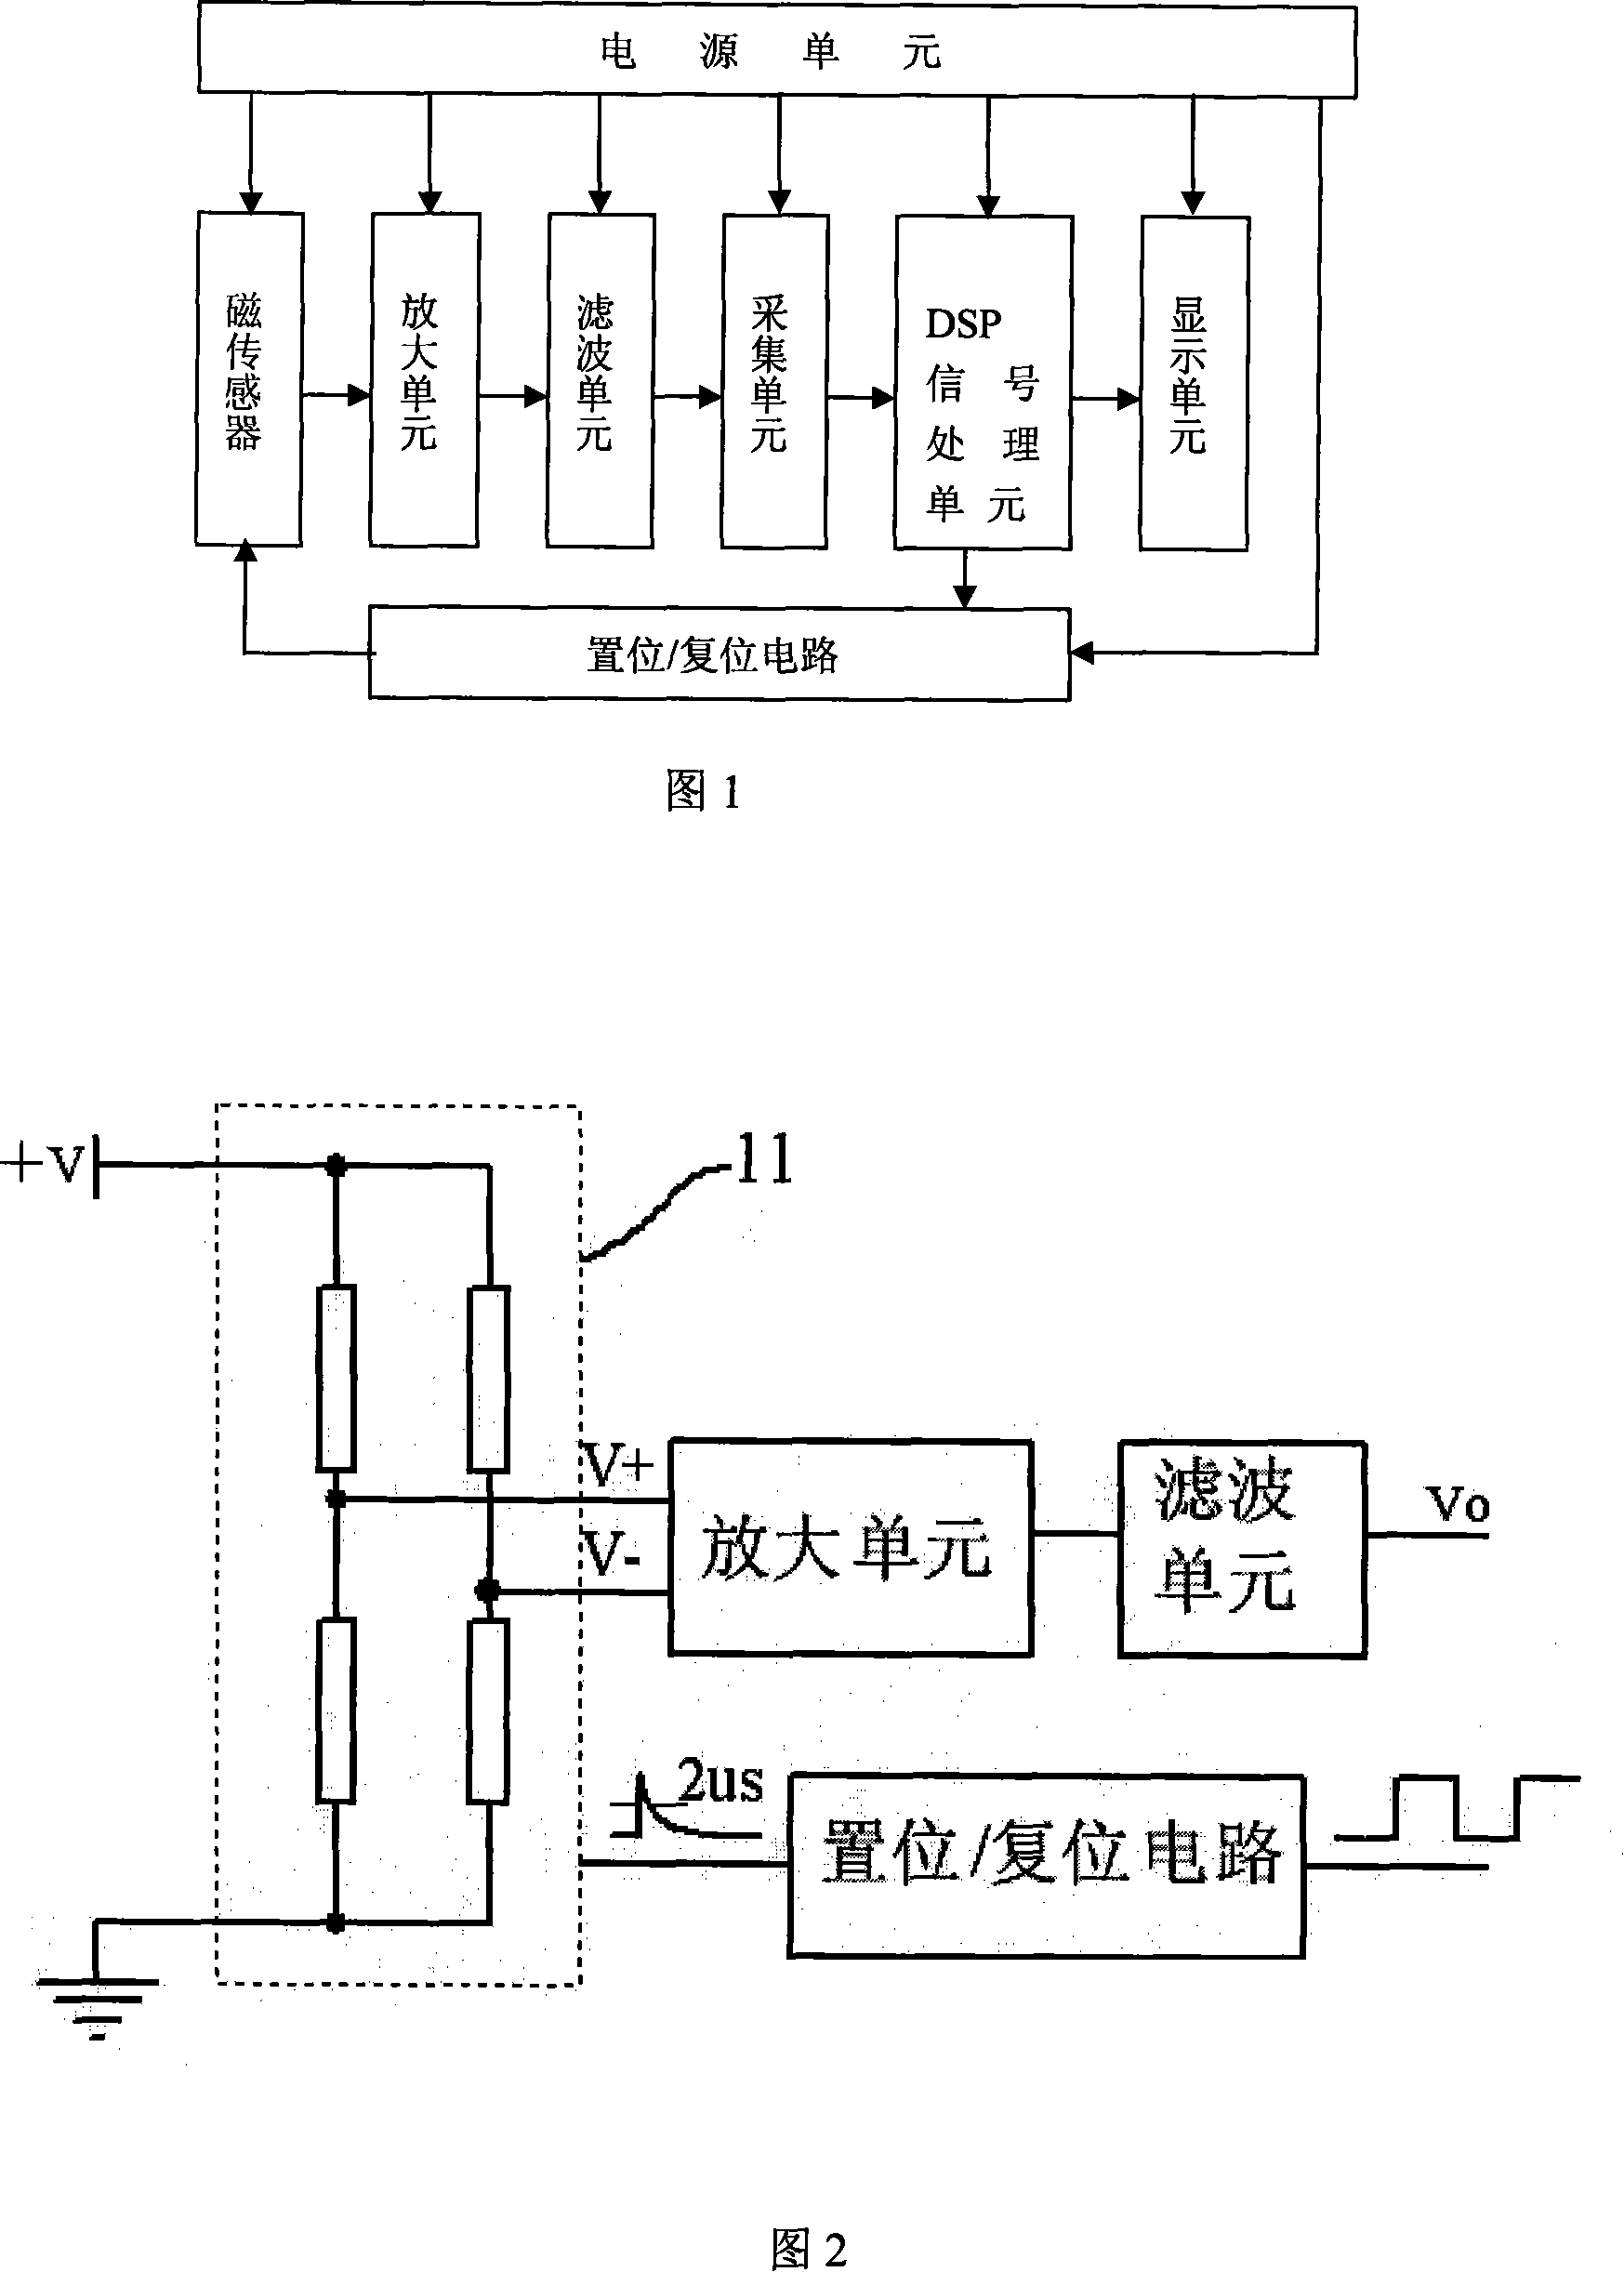 System for automatic cab model recognition and automatic vehicle flowrate detection and method thereof